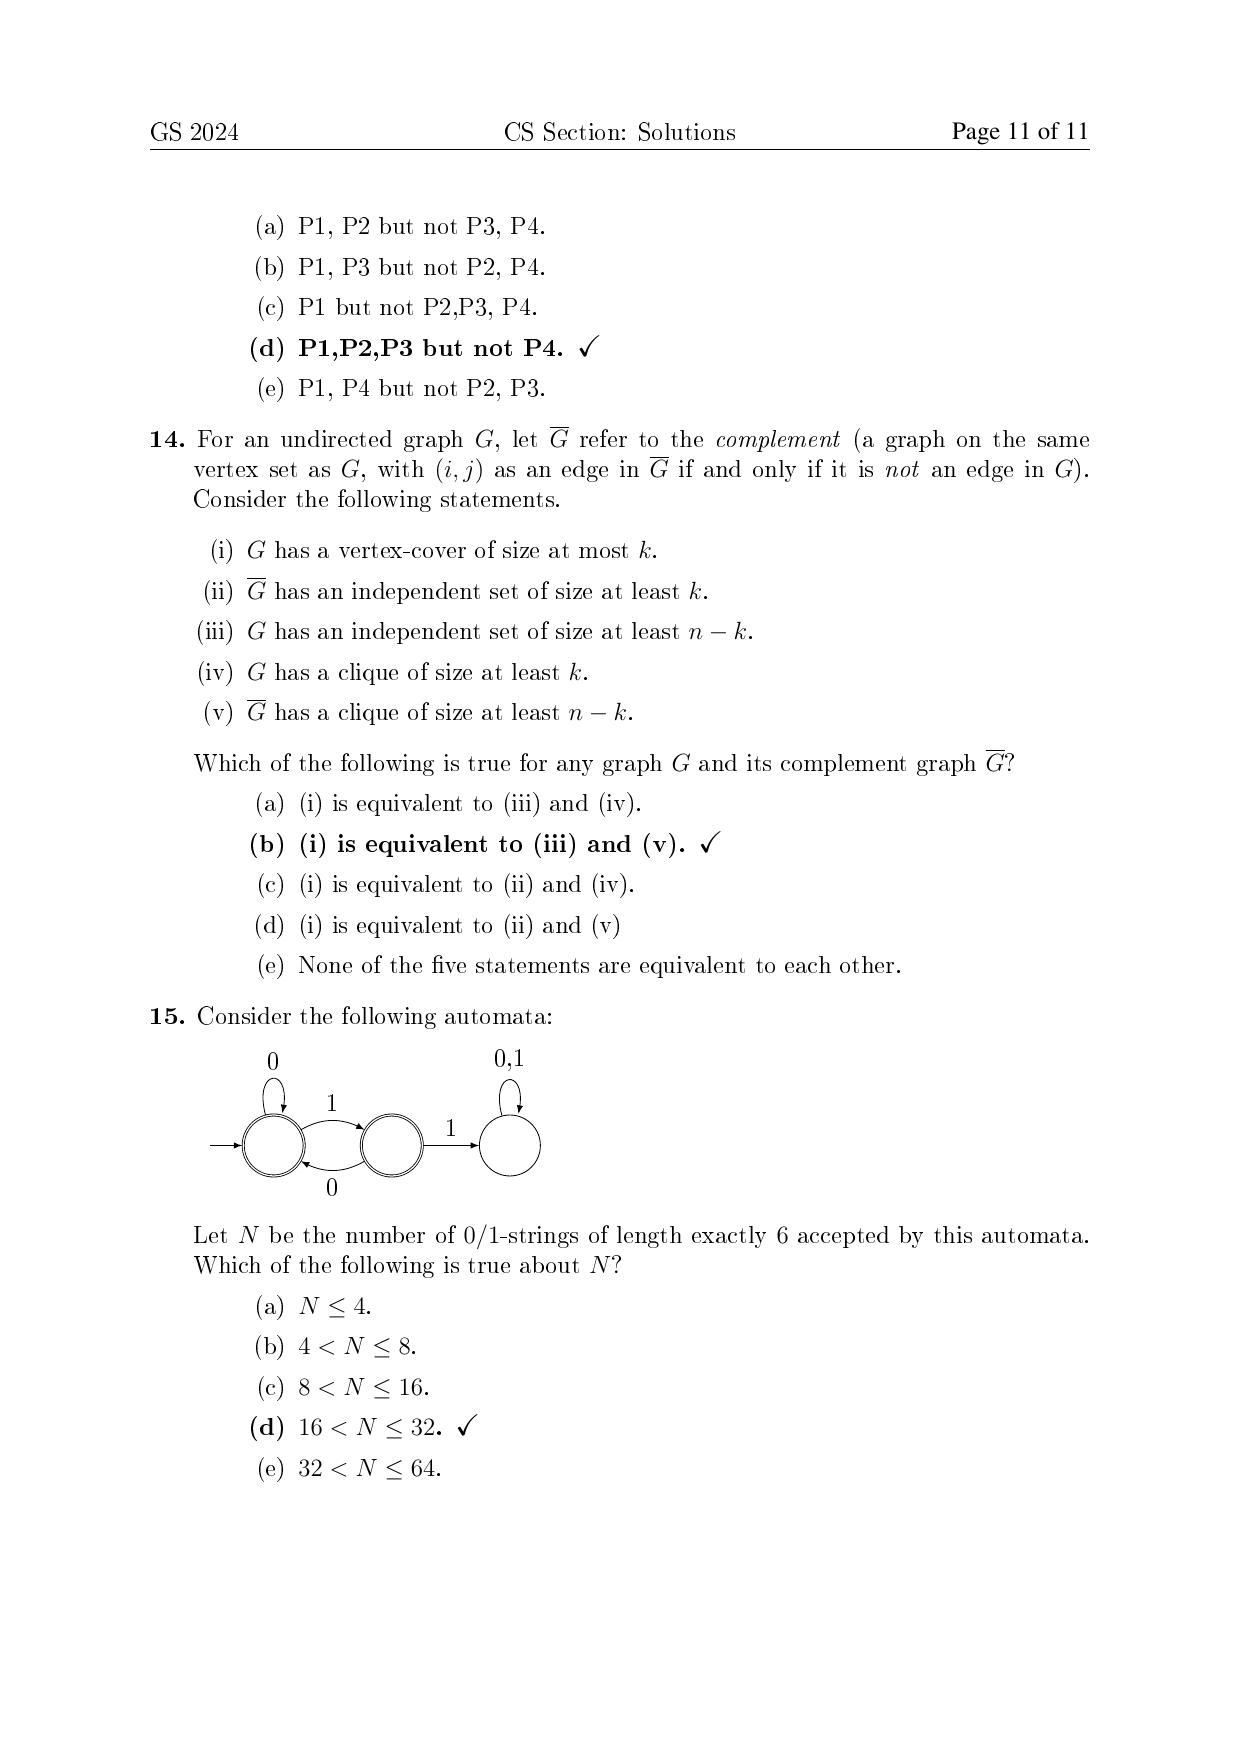 TIFR GS 2024 Computer Science Question Paper - Page 11